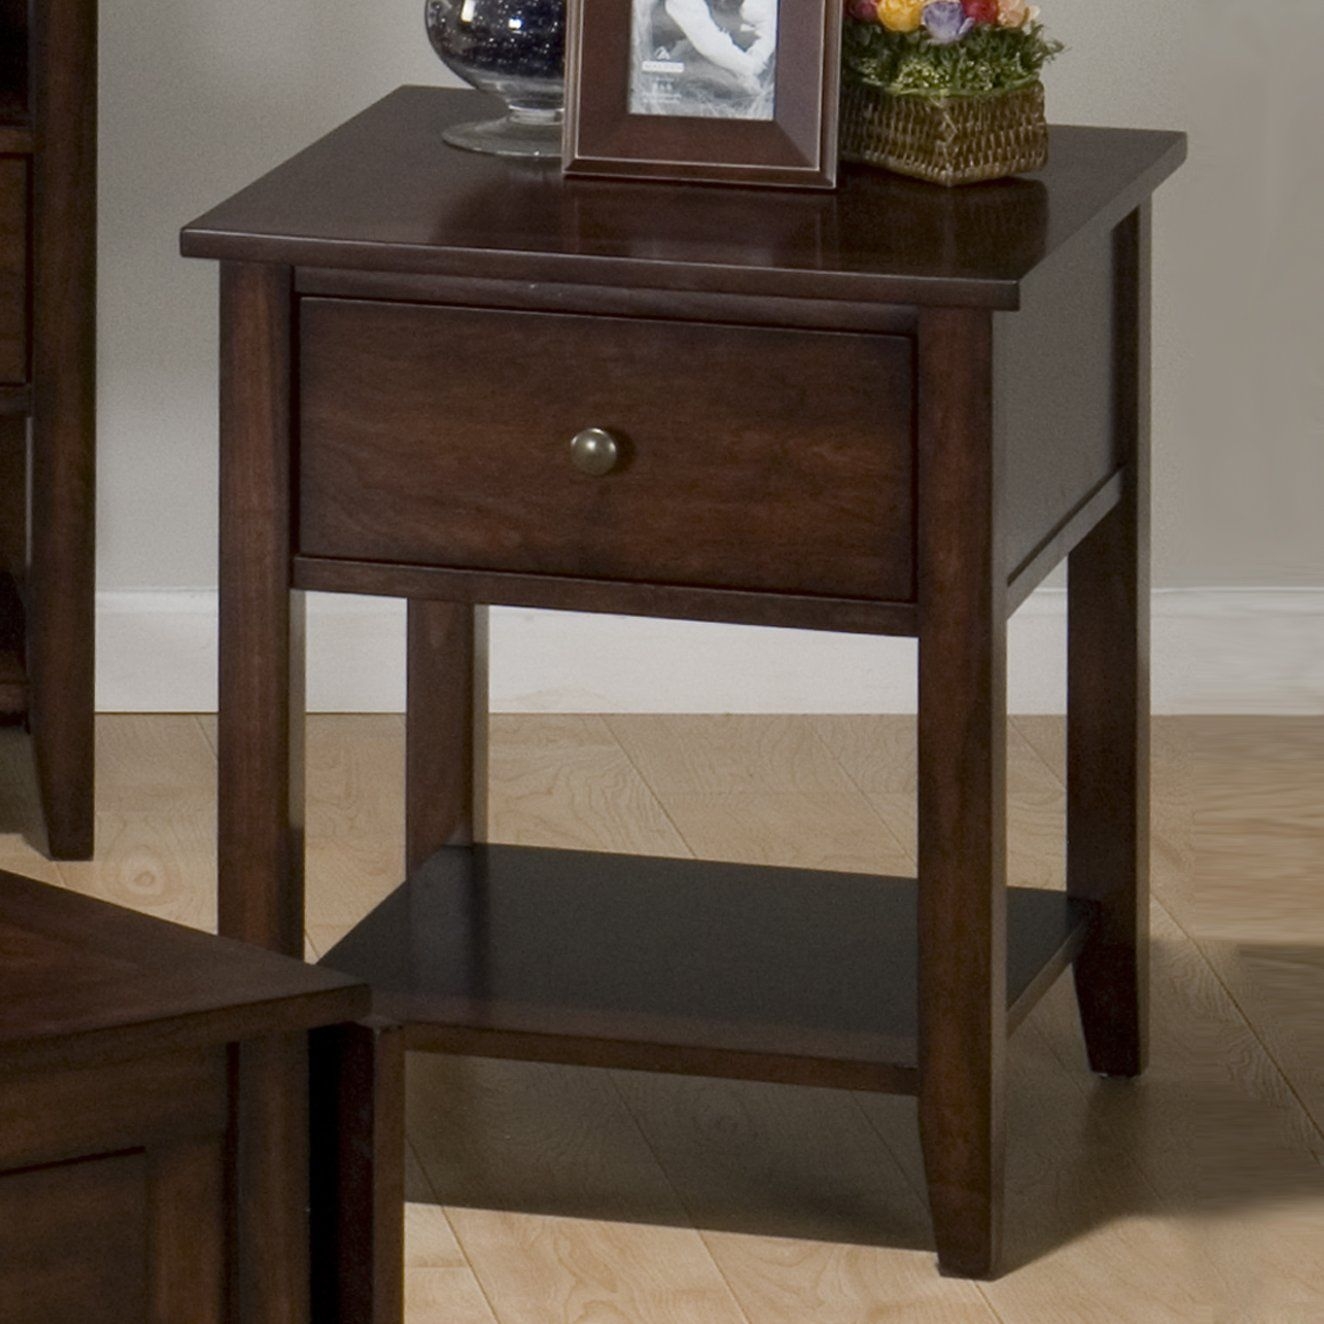 Cherry end table with drawer